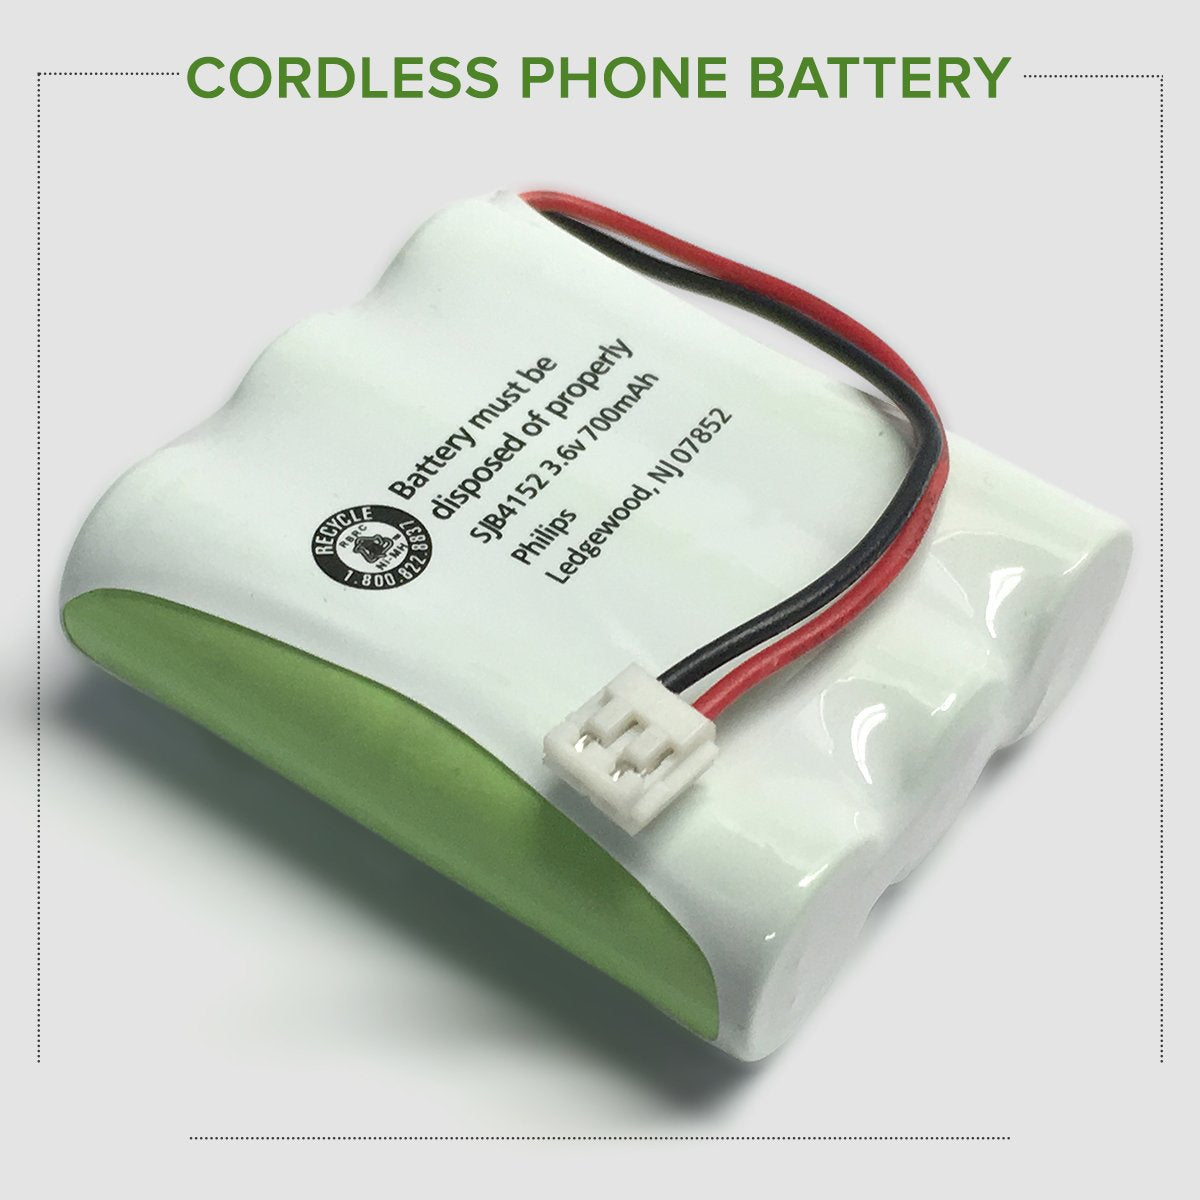 GE 2-6939GE2-A Cordless Phone Battery